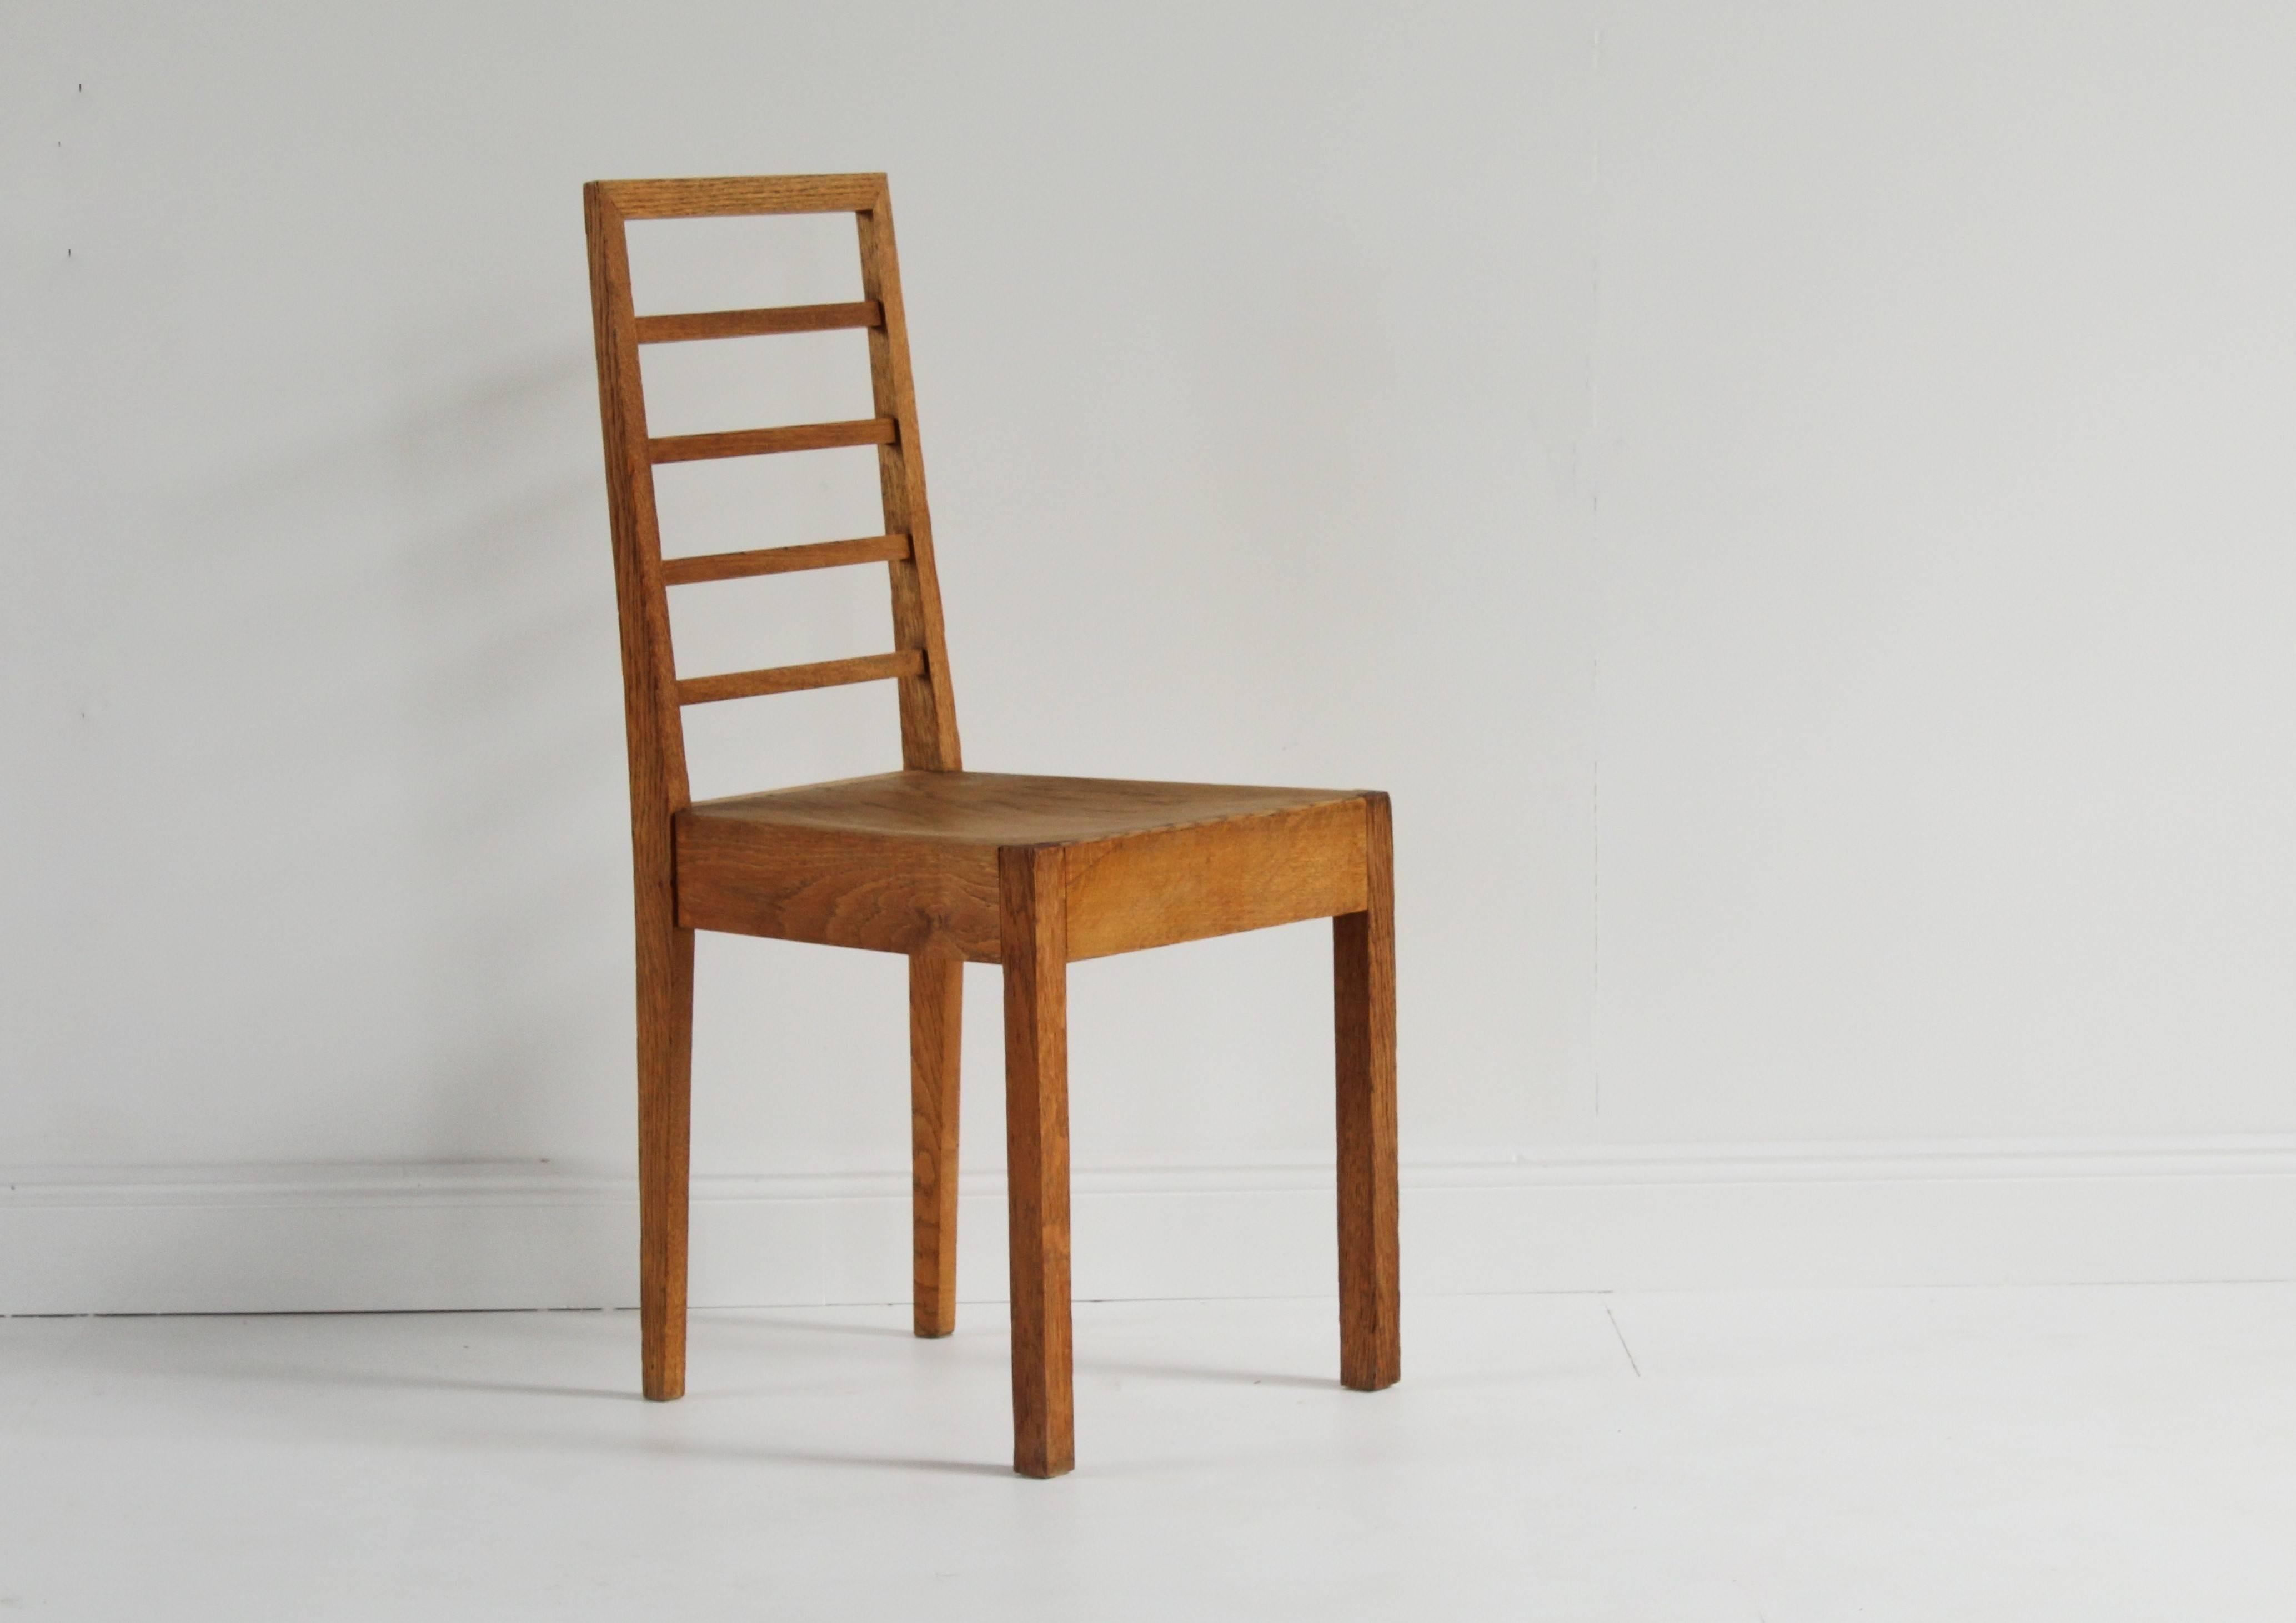 An office chair or side chair designed by Eliel Saarinen for Suomen Valtion Rautatiet (Finnish State Railways). This present example from the Hallintorakennus administrative building in Helsinki. Produced in oak, marked with a paper label from